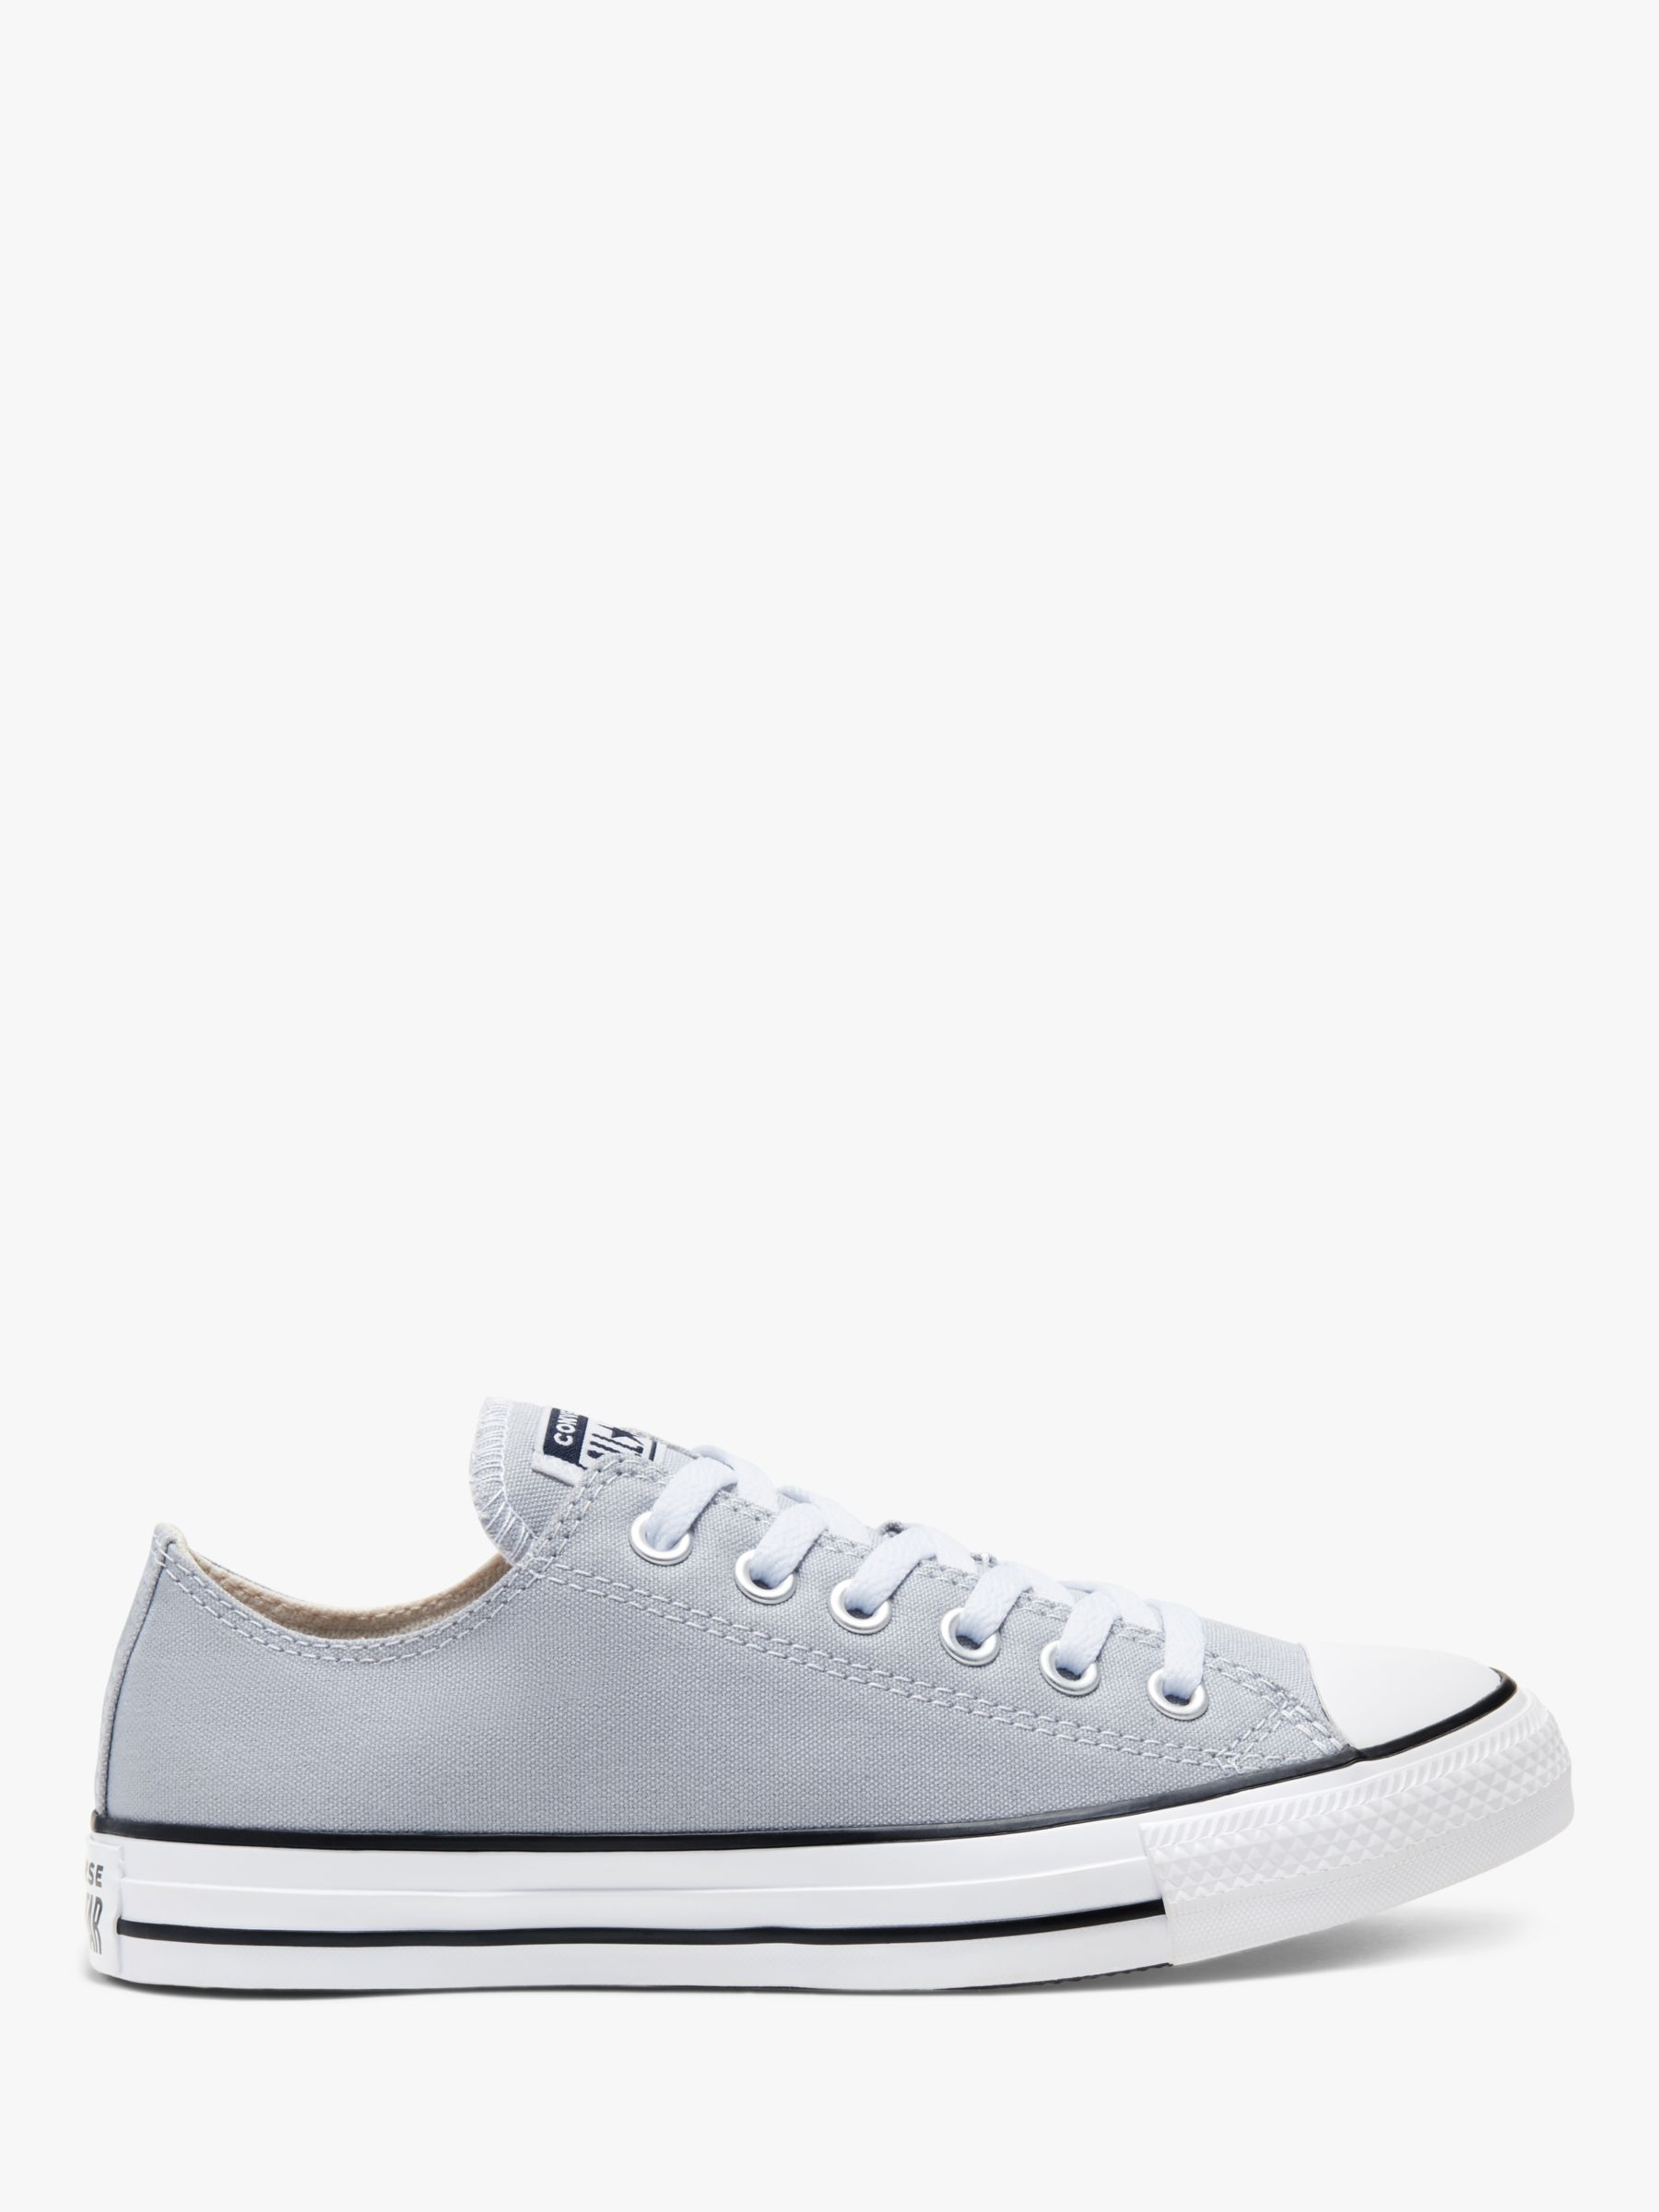 Defile Get married Exercise Converse Chuck Taylor All Star Canvas Ox Low-Top Trainers, Wolf Grey